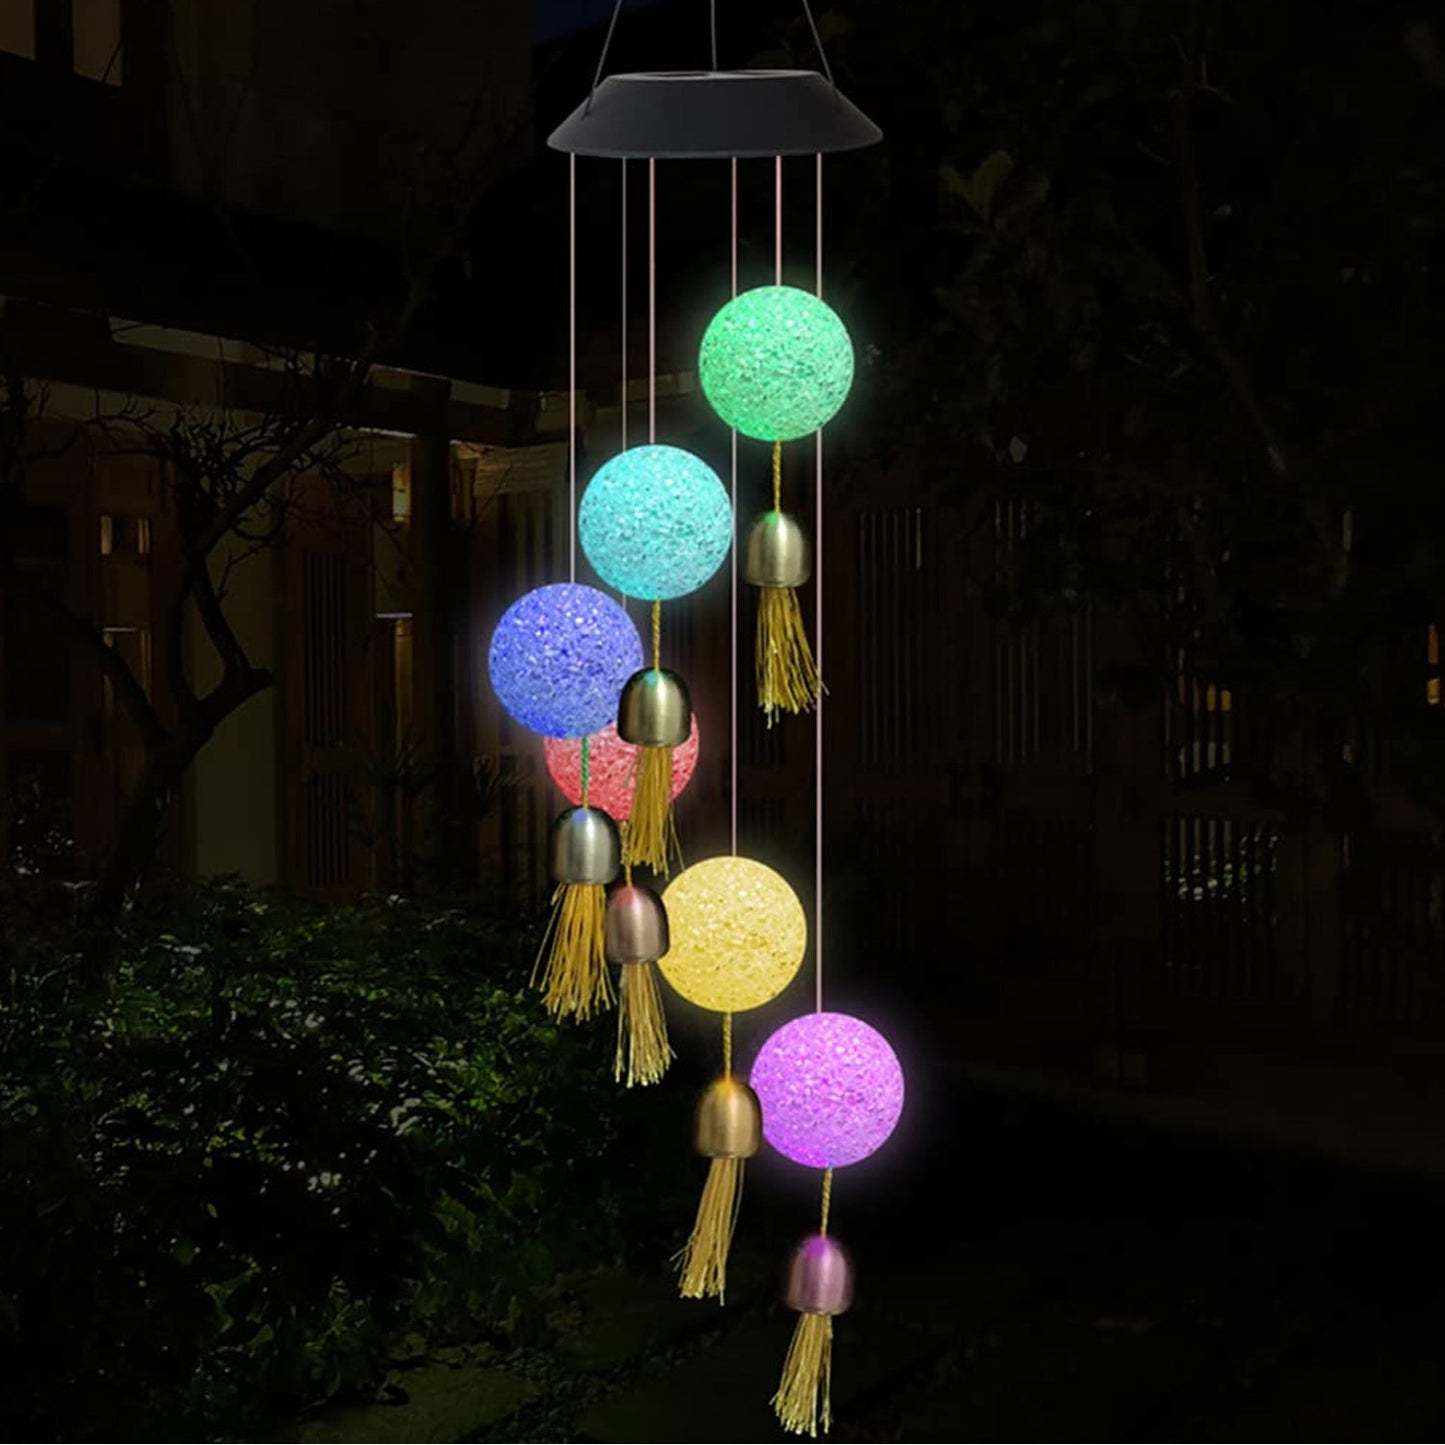 8318 Solar Crystal Ball Wind Chime, Color Changing Solar Powered LED Hanging Wind Chime Light Mobile for Patio Yard Garden Home Outdoor Night Decor, Gifts